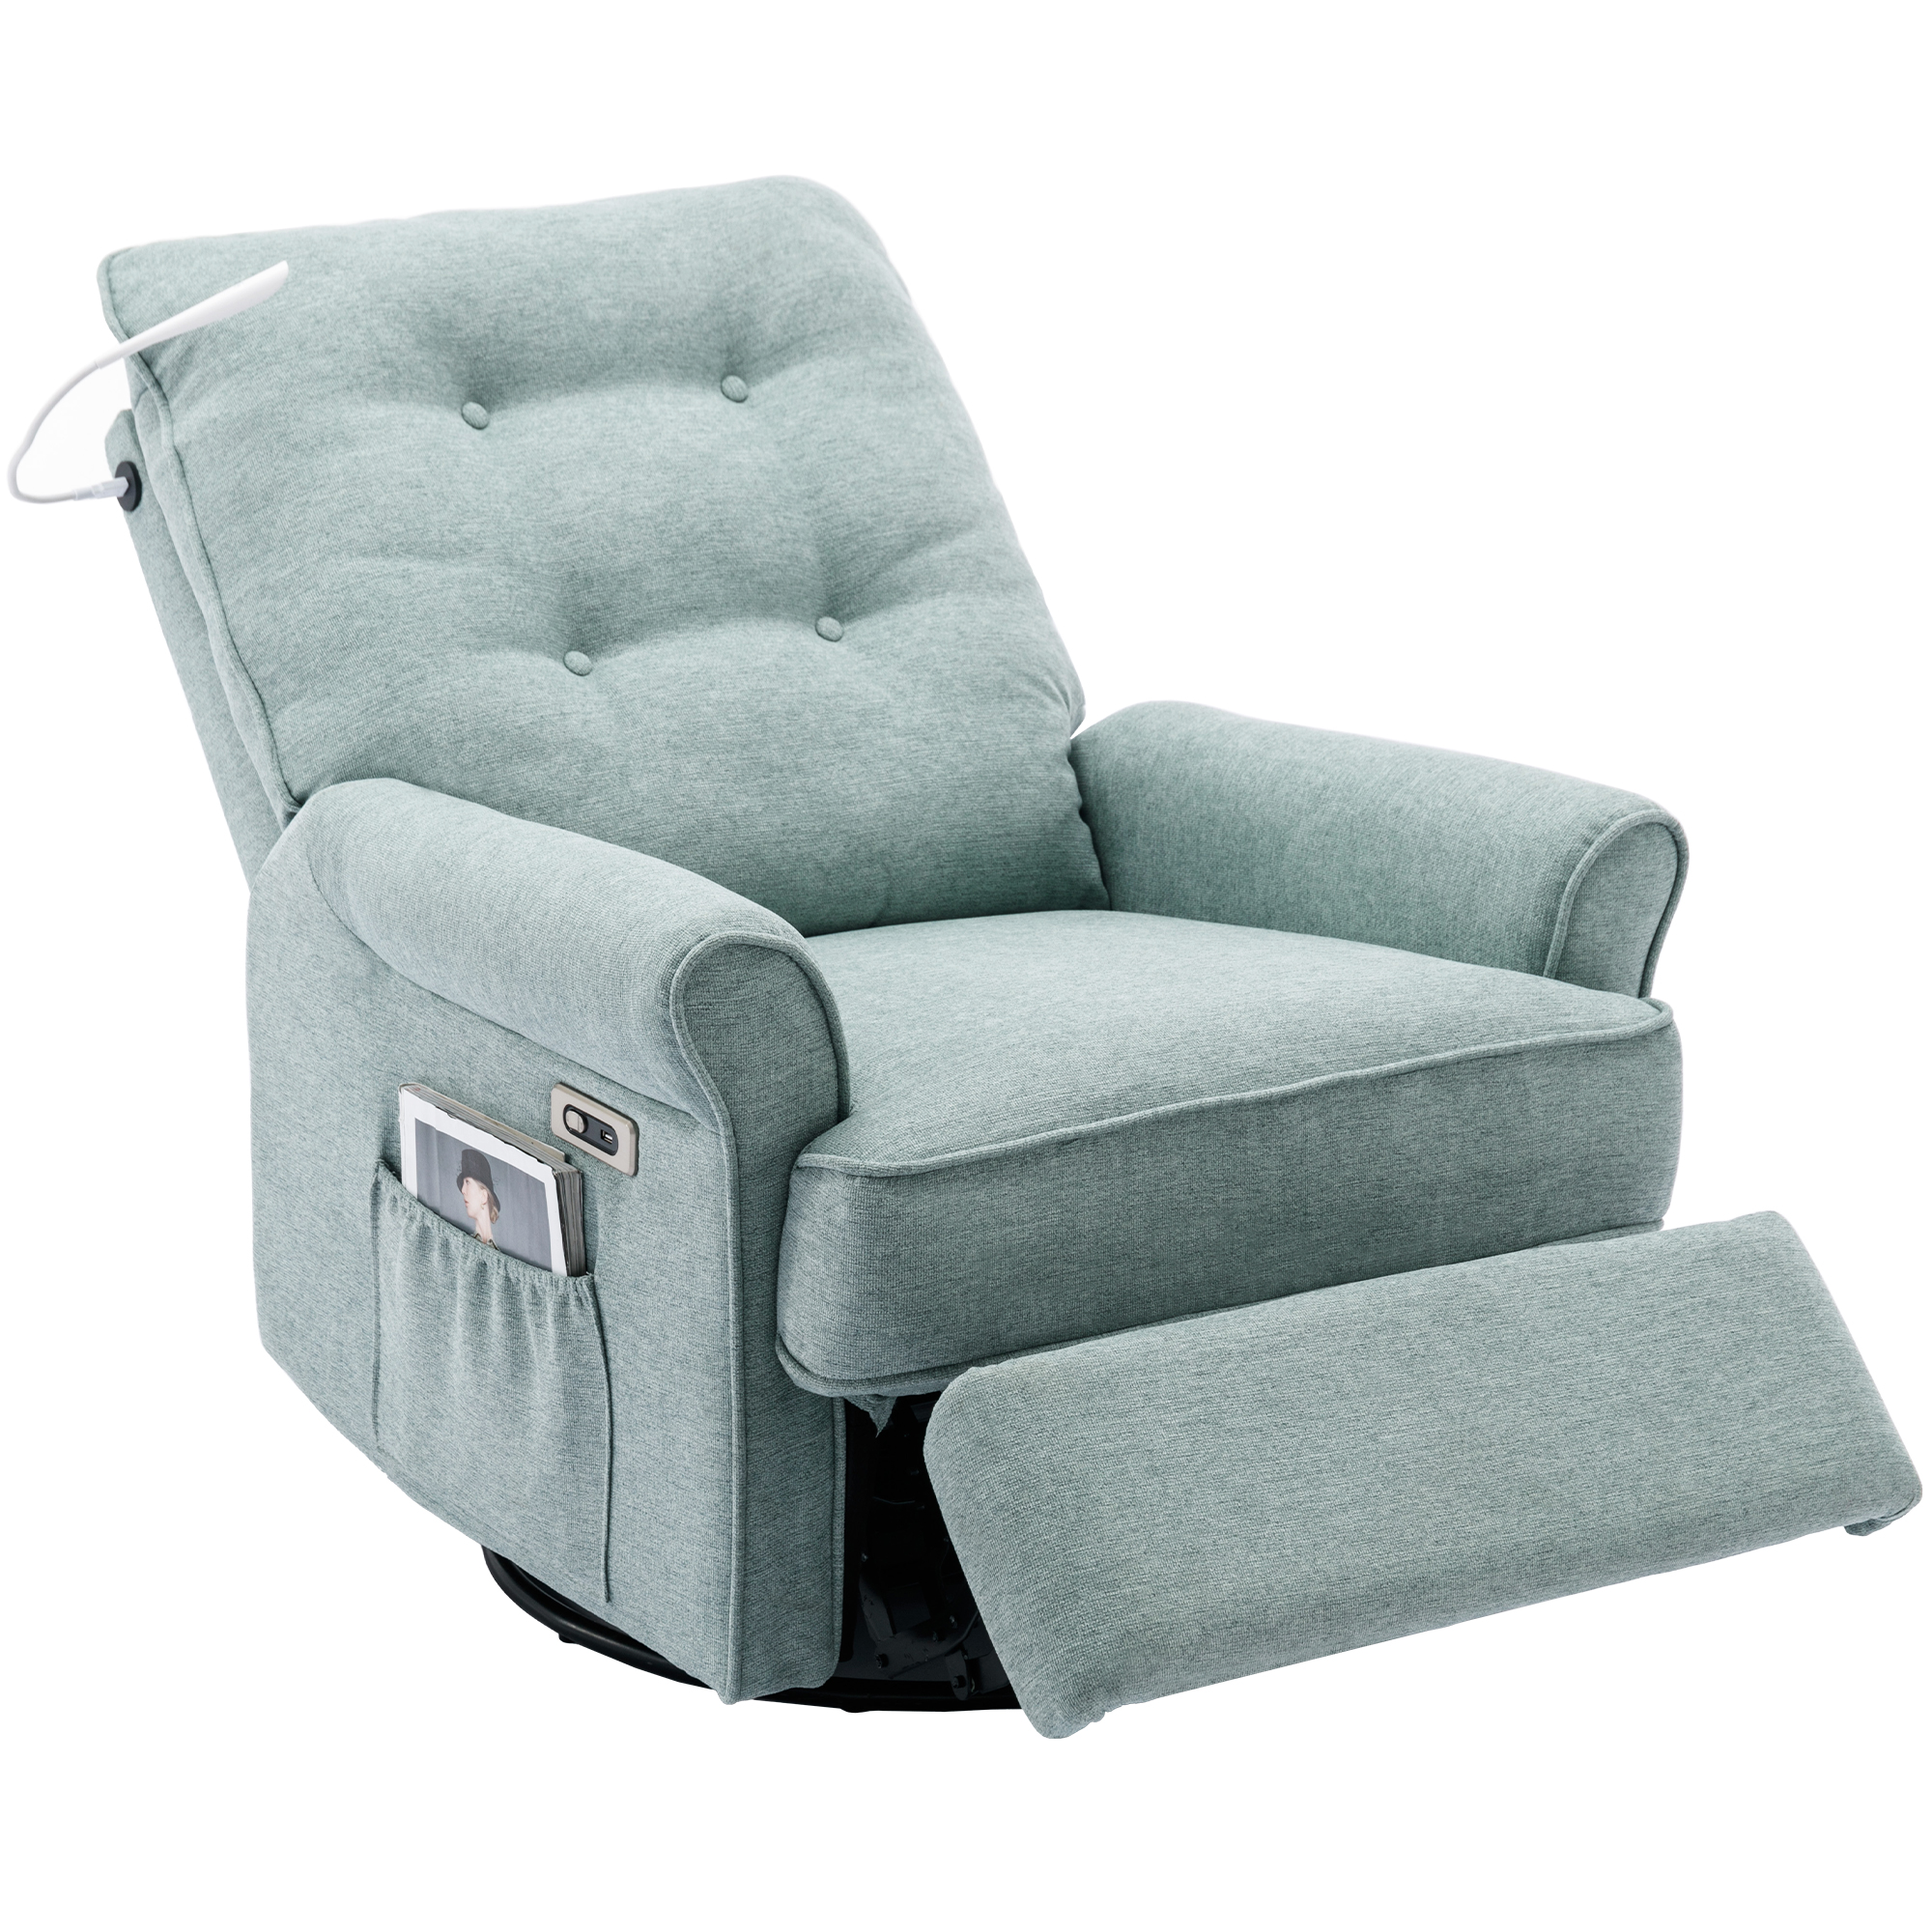 270 Degree Swivel Recliner Chairs With USB Port, Side Pocket And Touch Sensitive Lamp - SG000910AAC